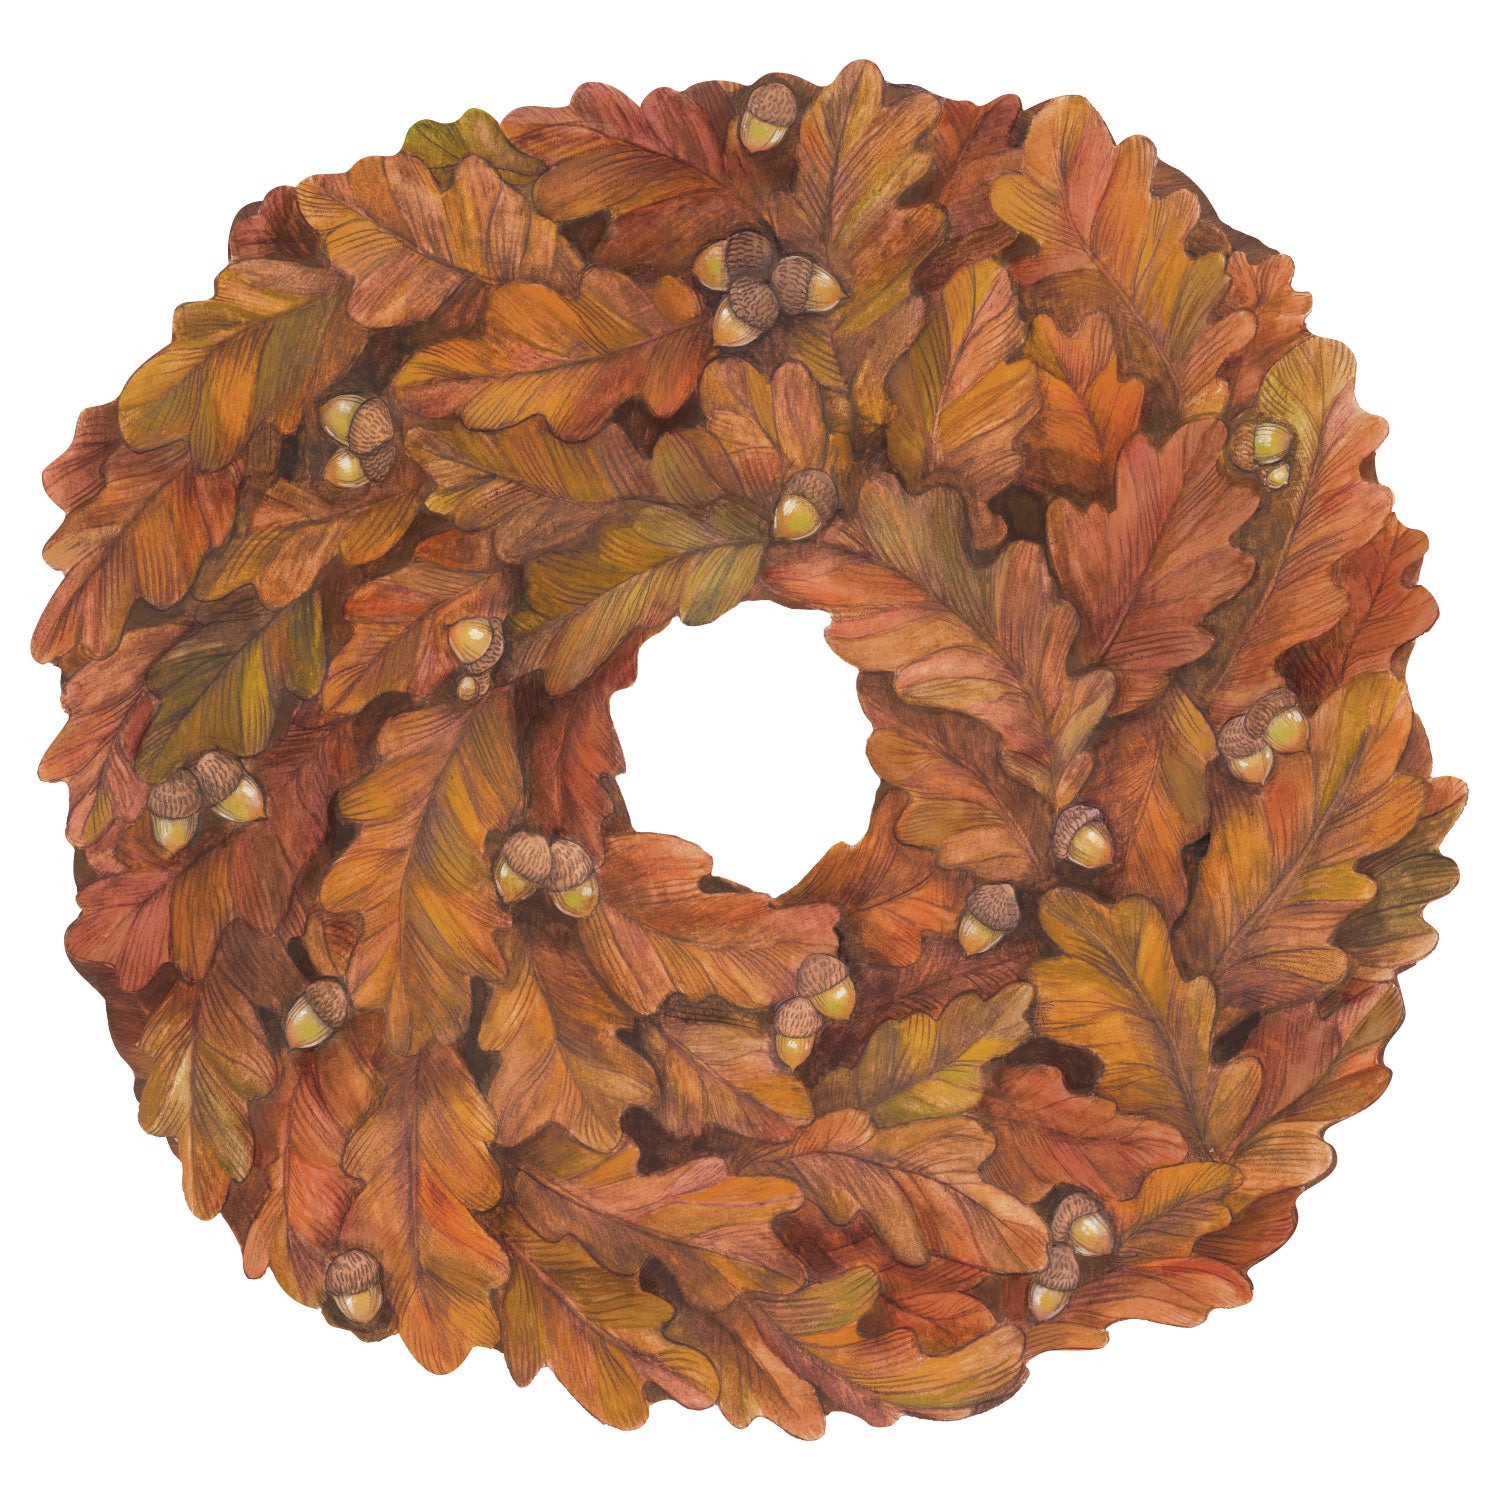 Round paper placemat with autumn leaves printed on it